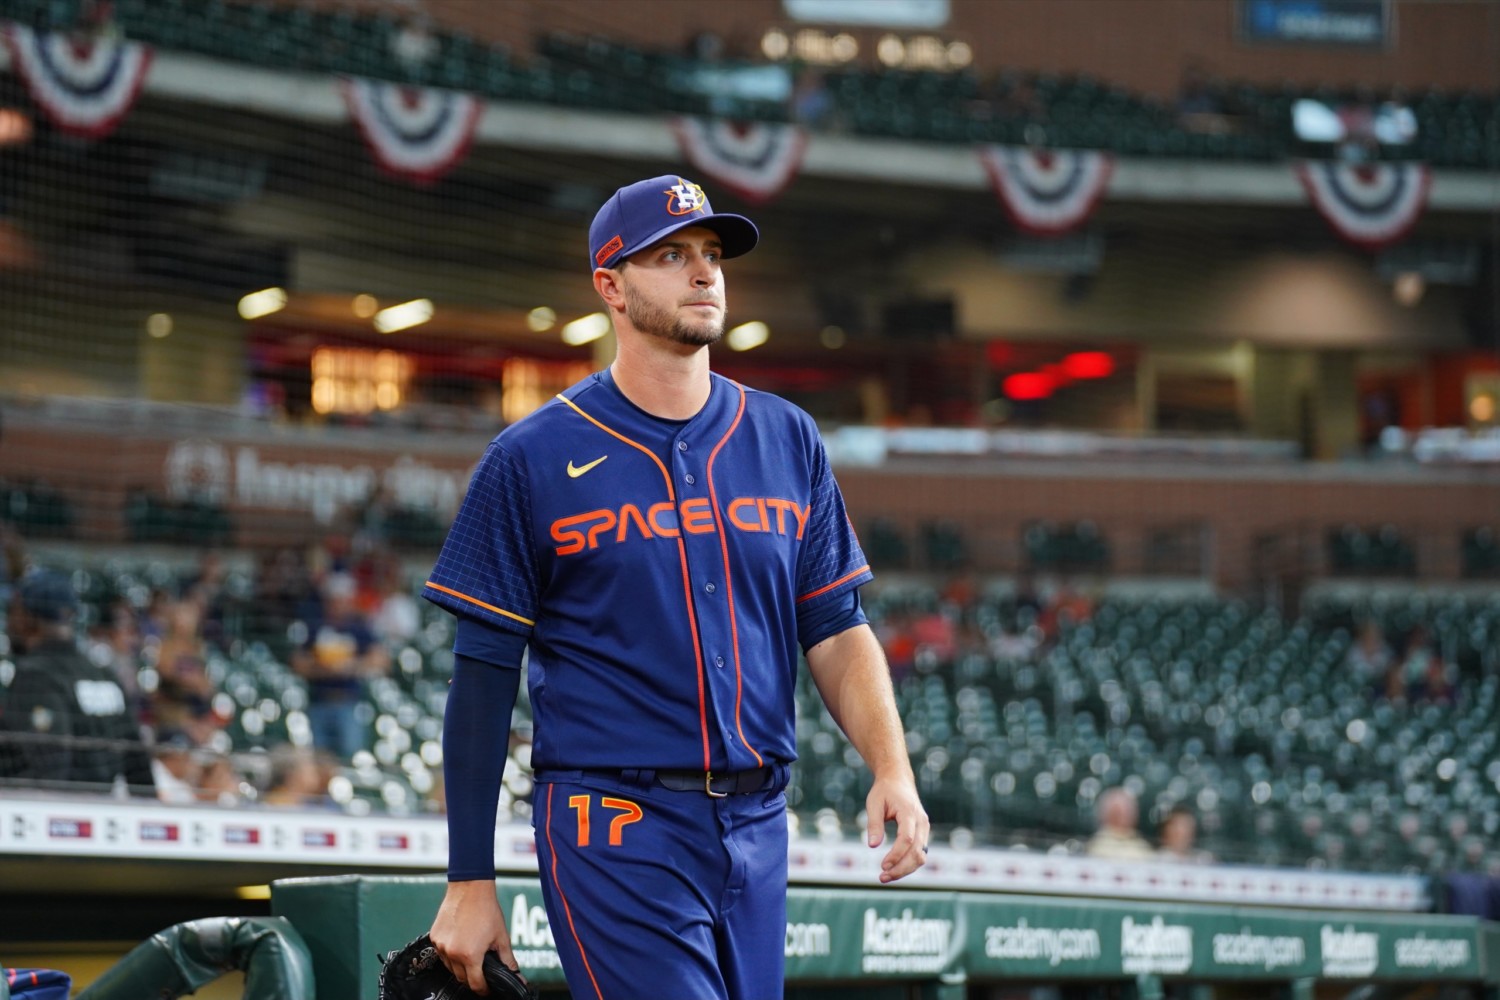 Astros Shatter Sales Record with Space City Jersey Launch